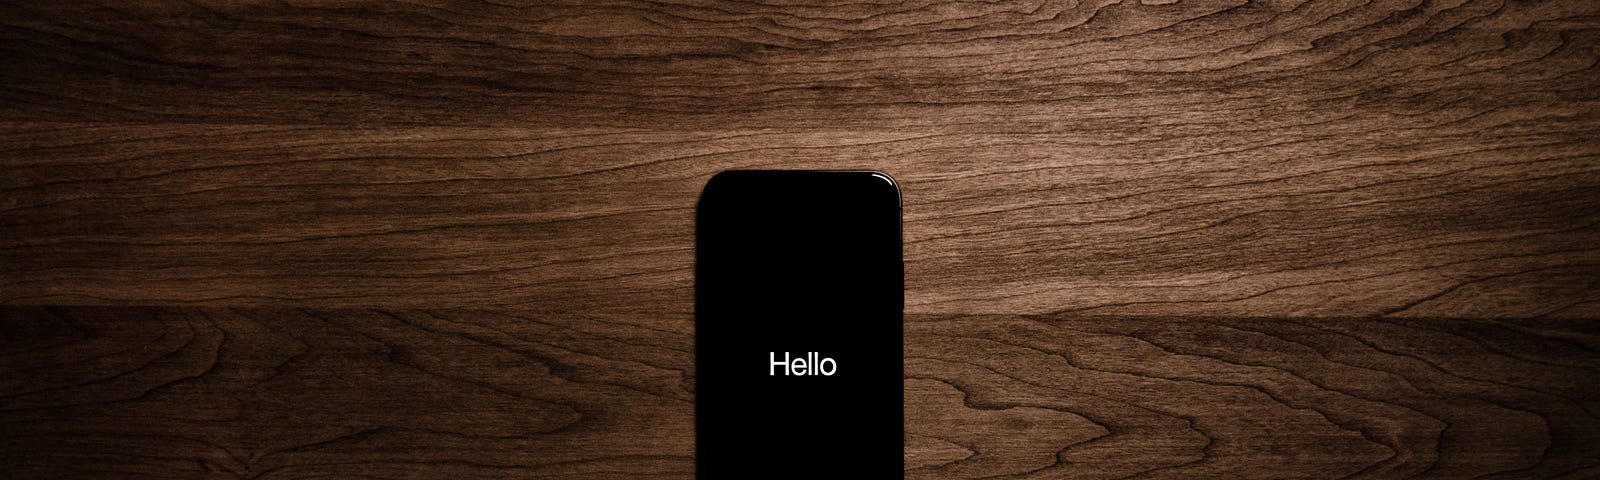 Simple white text that says “Hello” on a black iPhone background